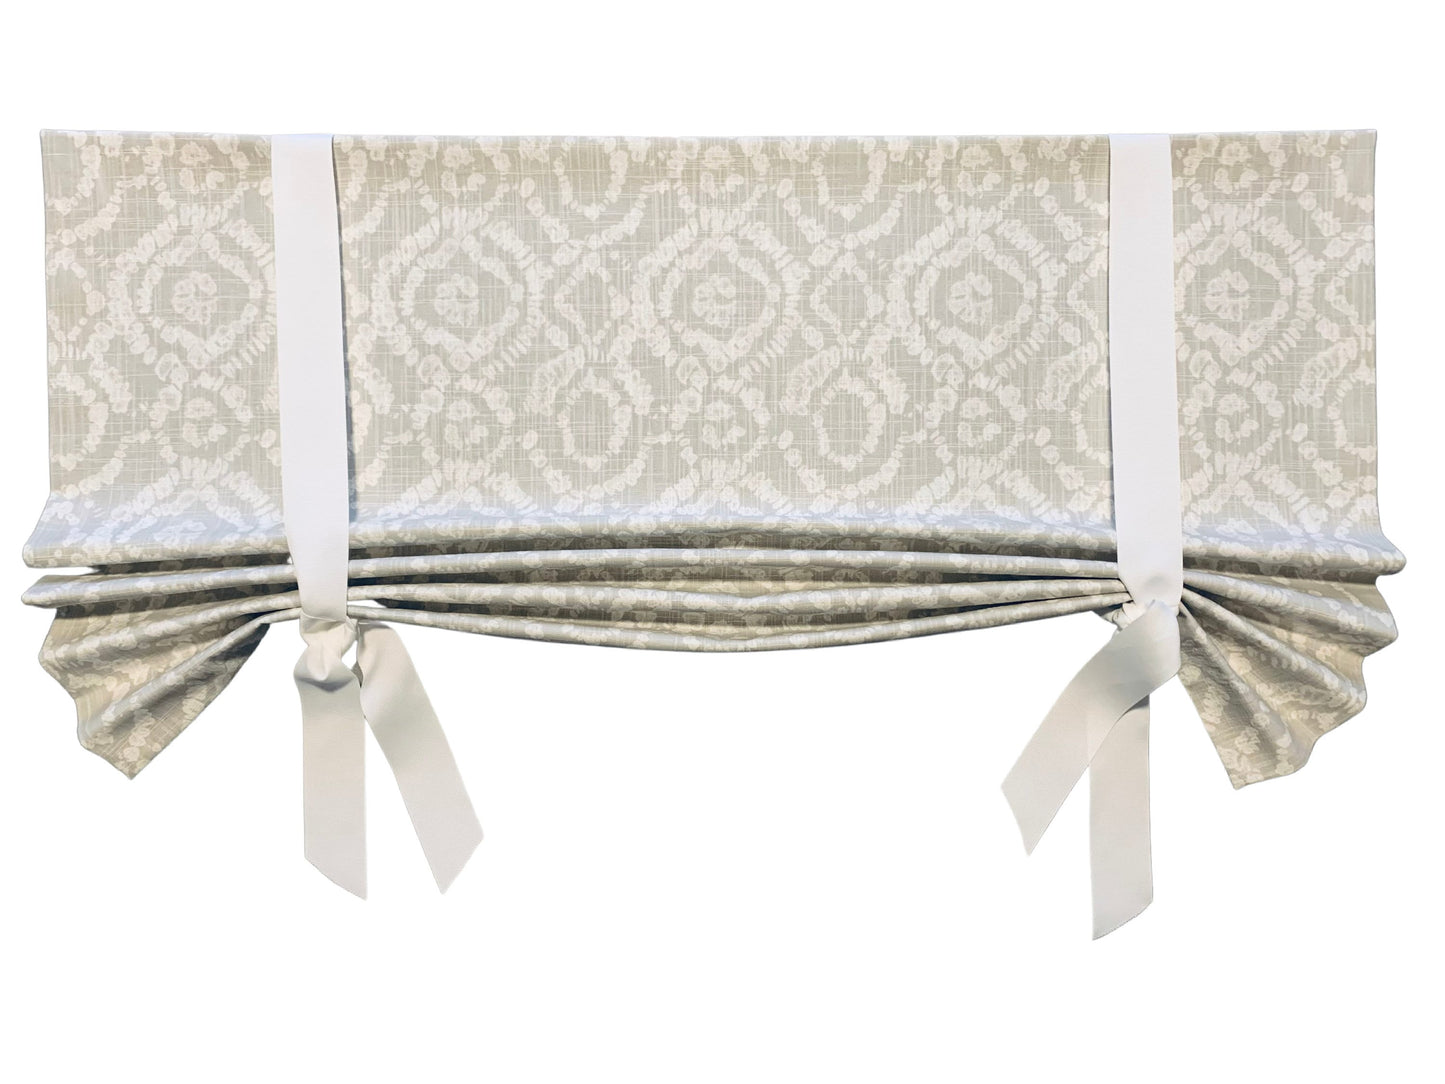 Custom Made, Fully Lined Tie Up Valance in French Grey and White Braylon Print, 100% Cotton Relaxed Faux Roman Shade Valance